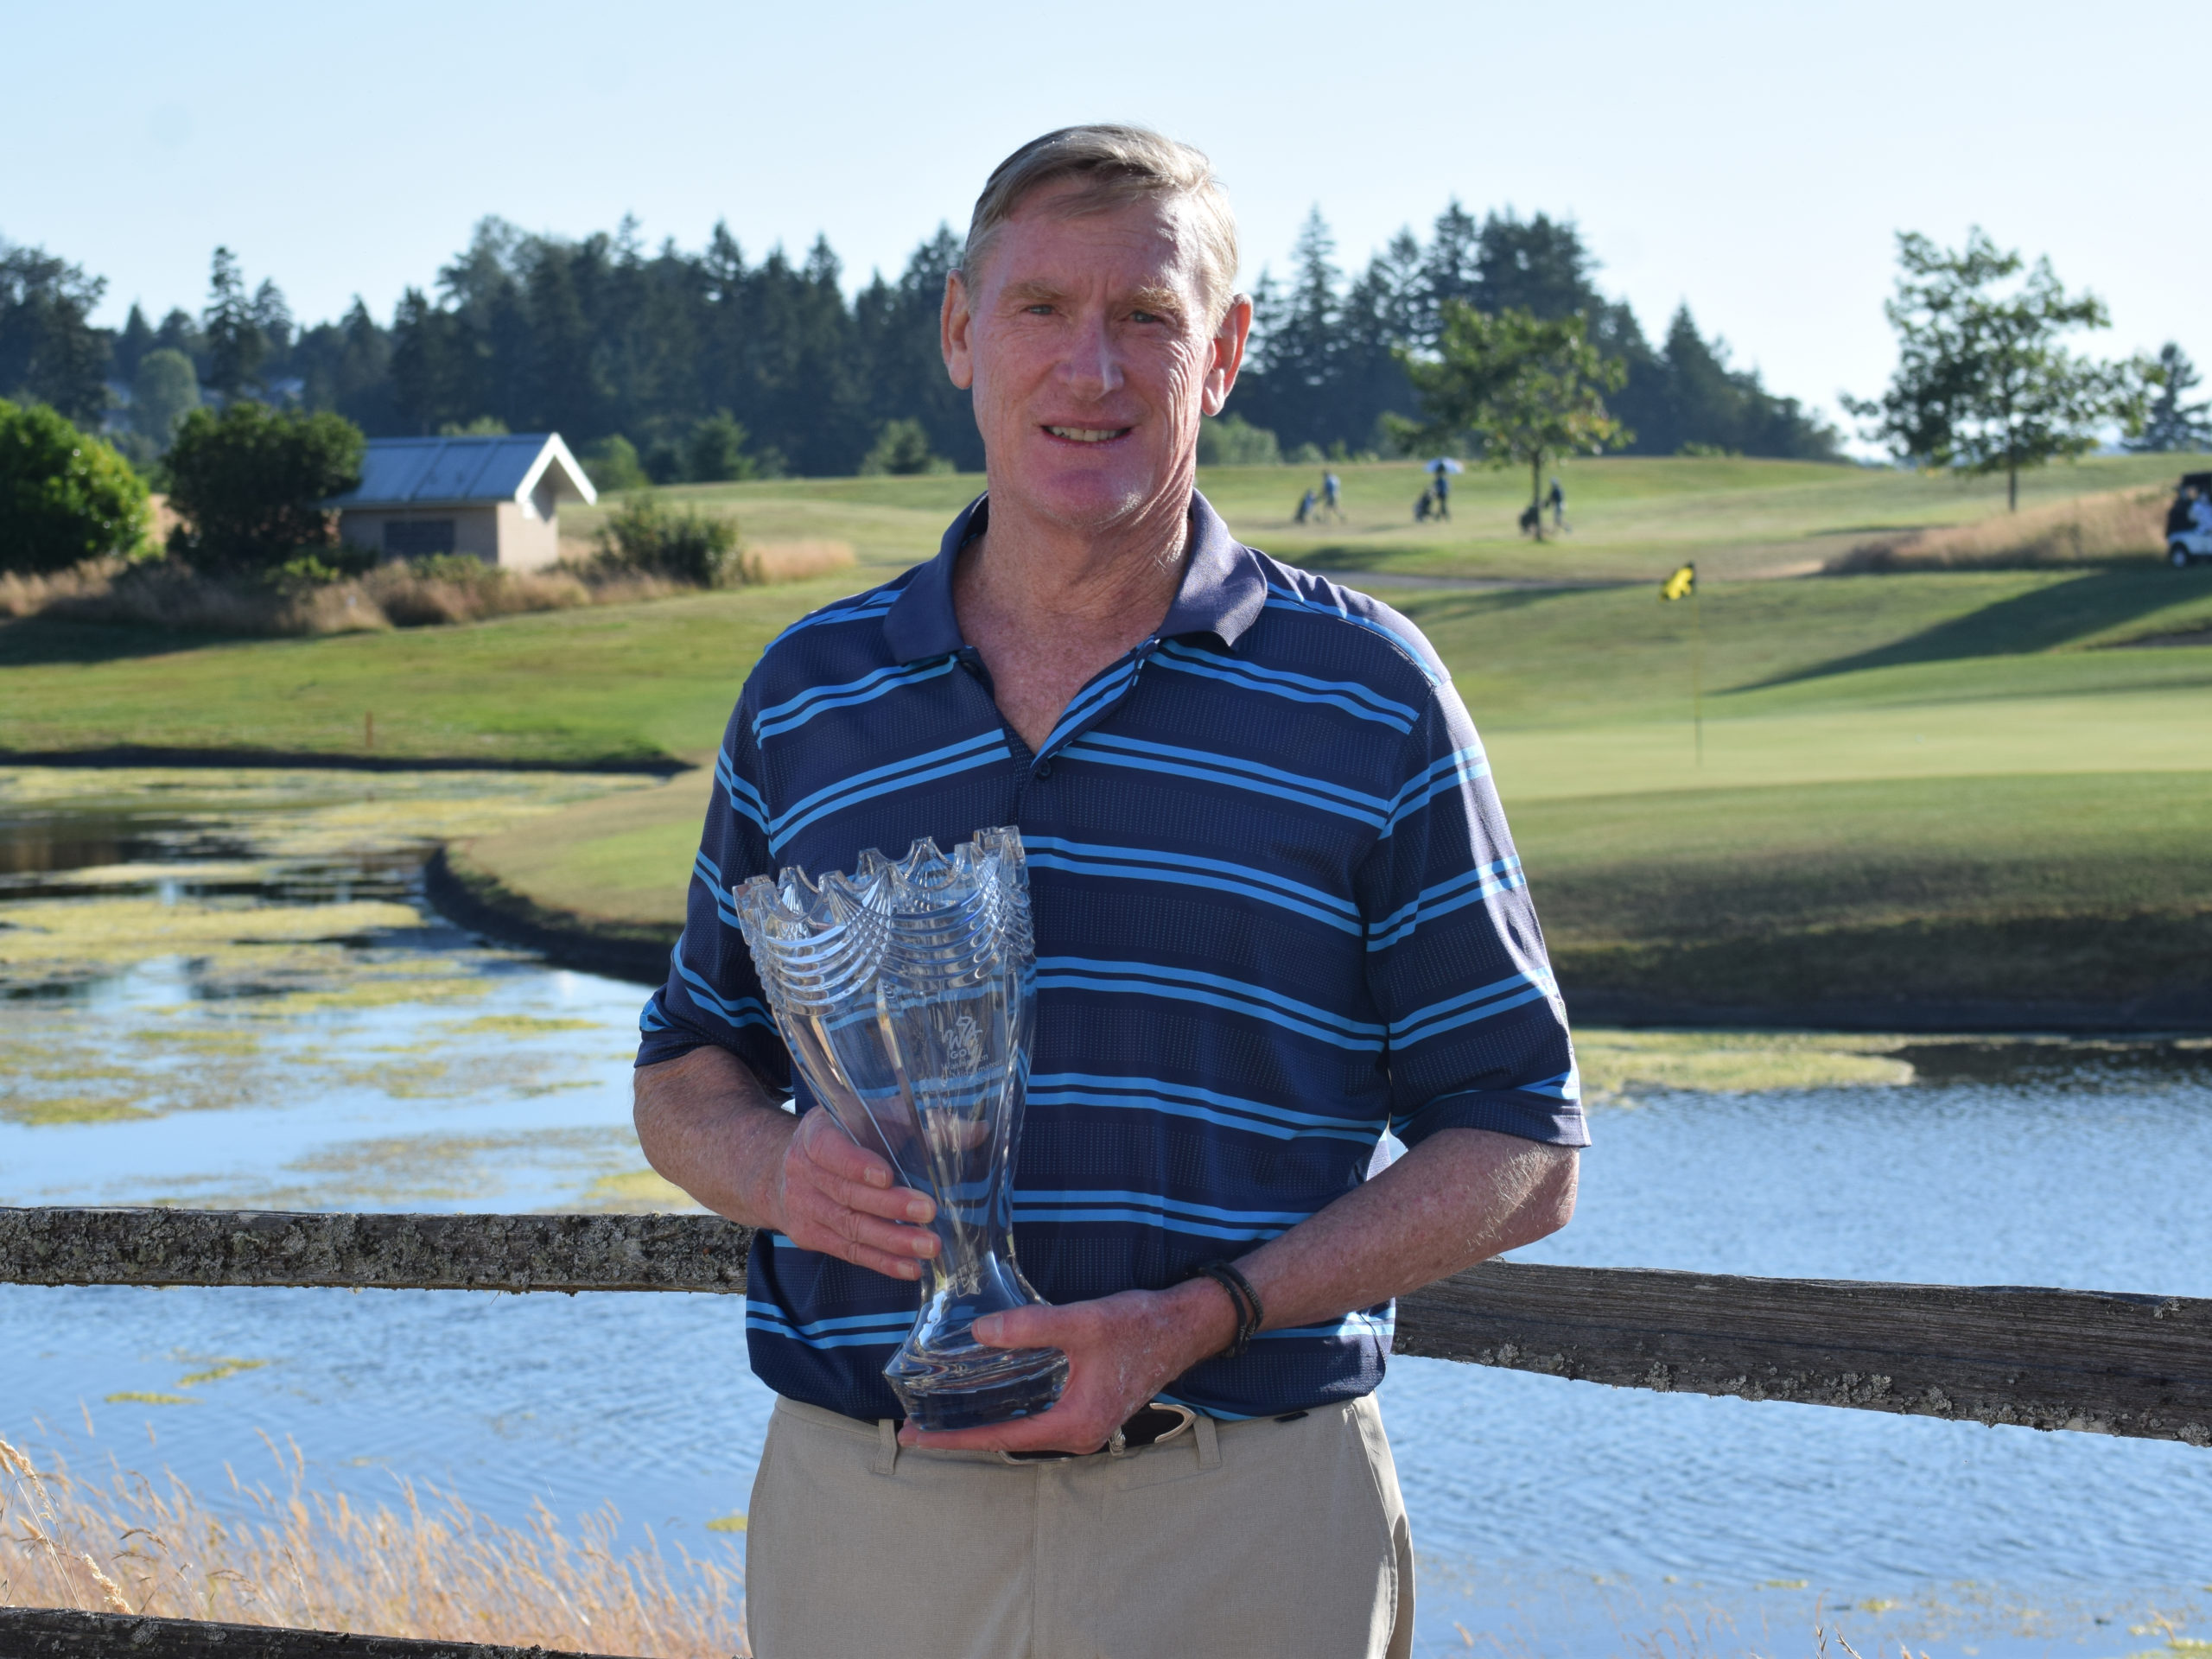 Brandes provides fireworks in becoming oldest state Mid-Amateur Champion in U.S. picture image